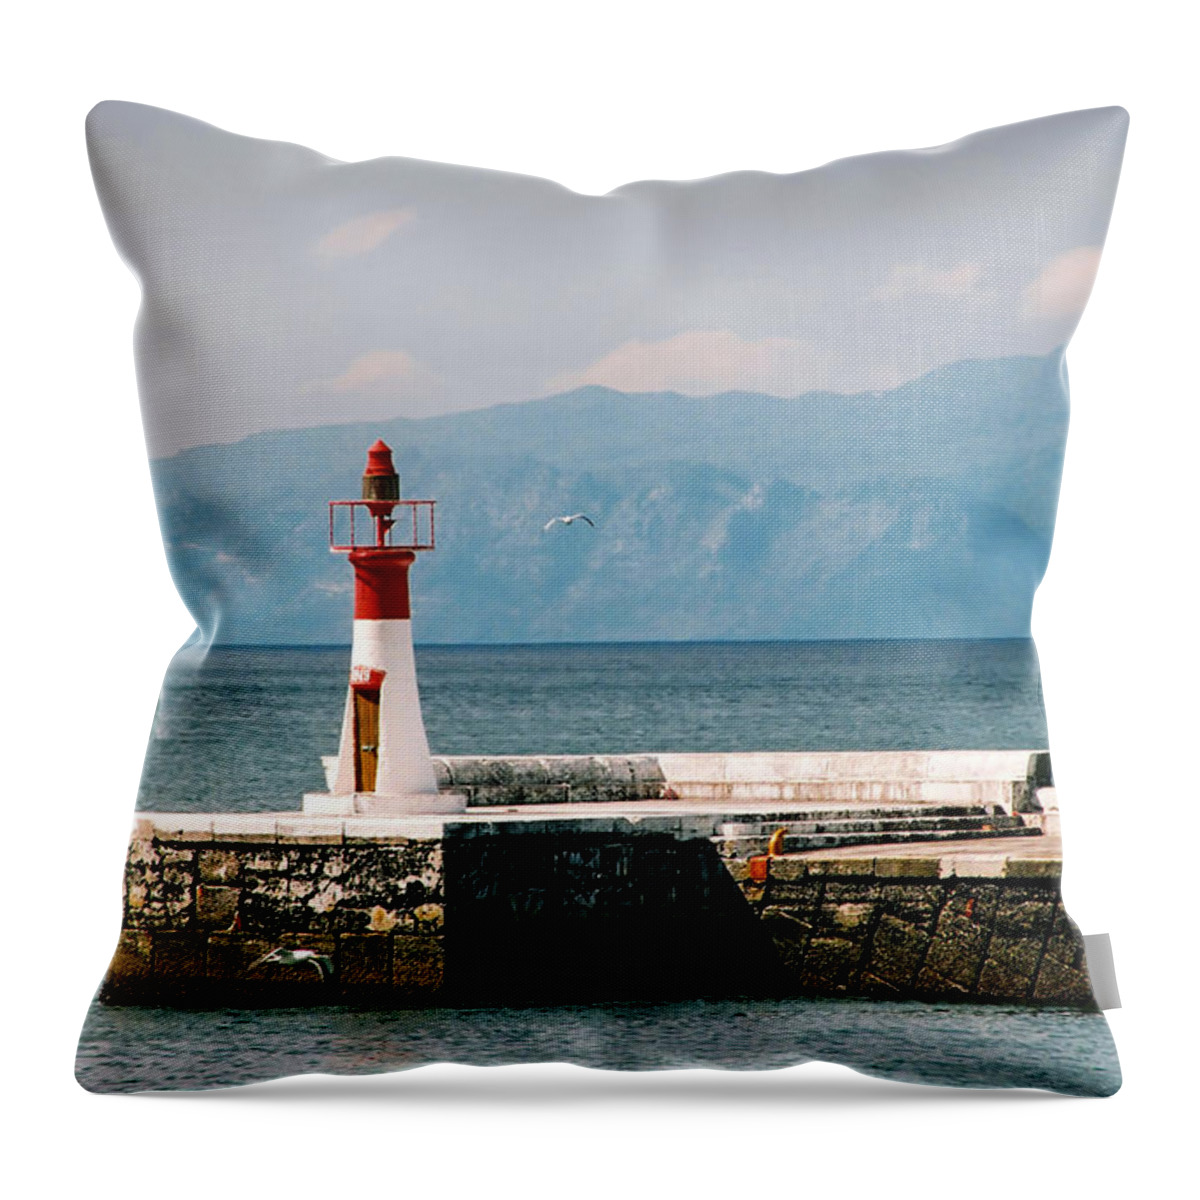 Whale Throw Pillow featuring the photograph Whale Breaching by Andrew Hewett